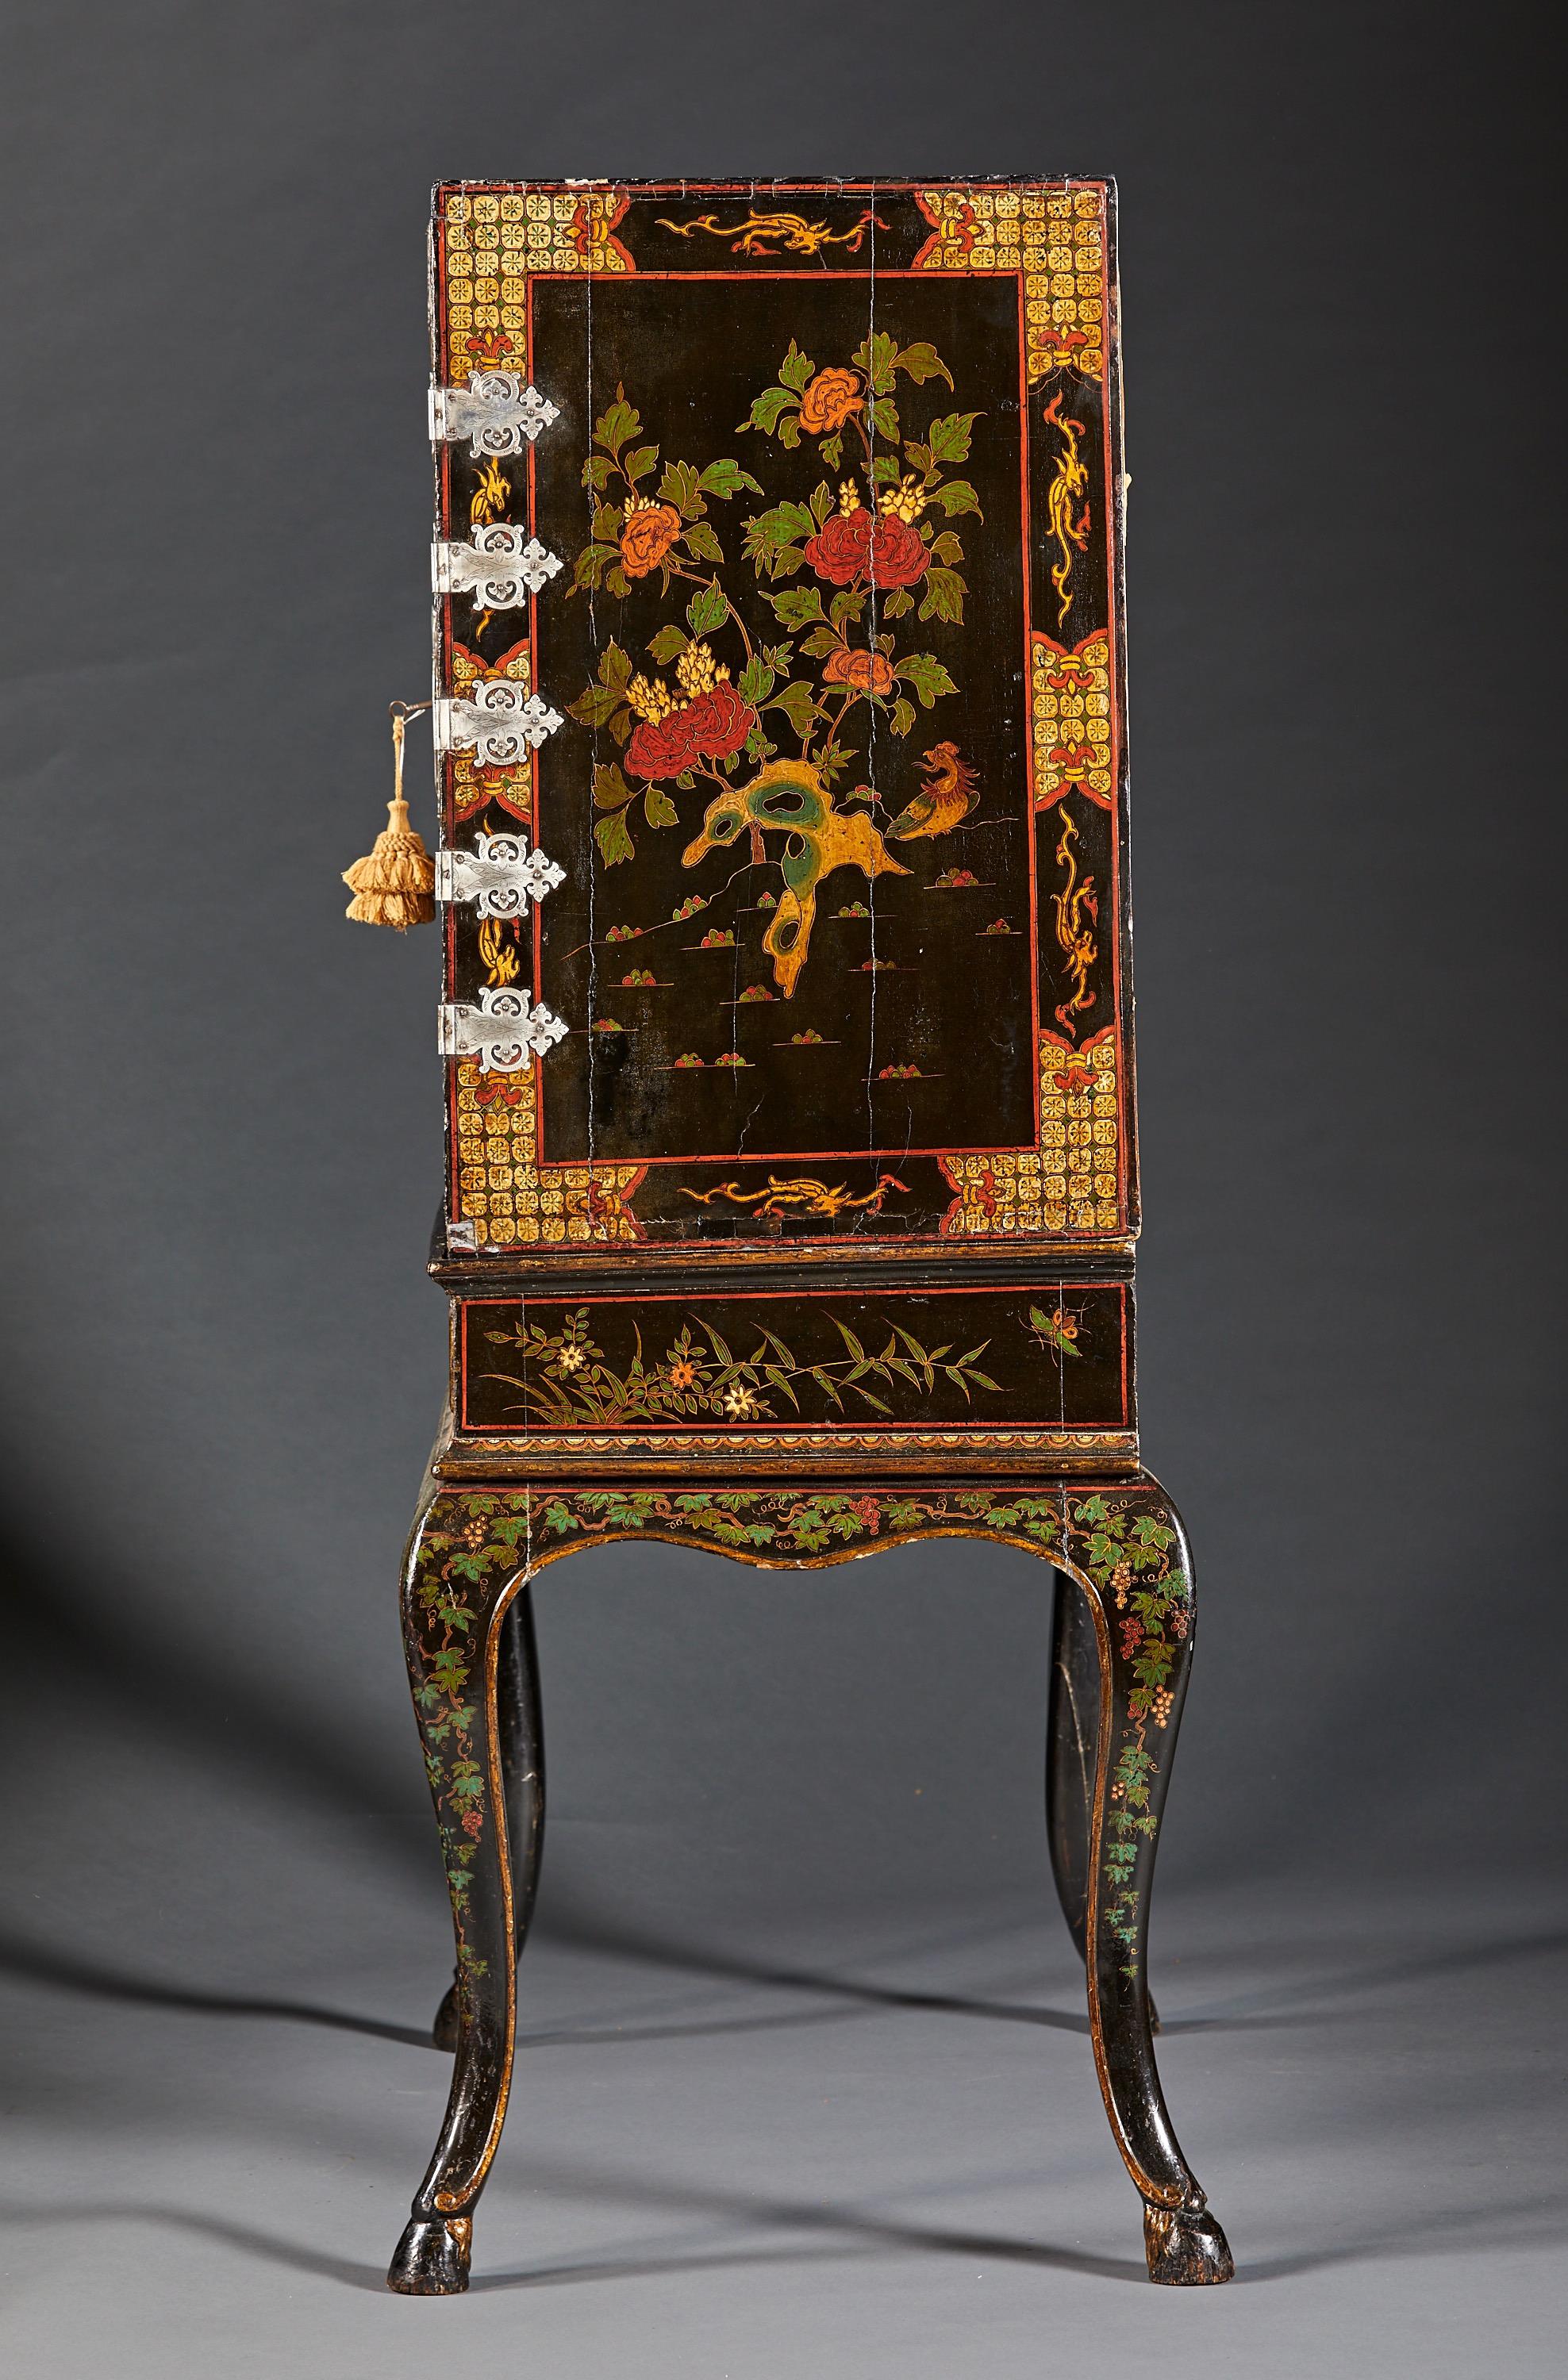 Carved Extraordinary Chinoiserie Decorated Lacquered Cabinet, Circa 1730, Engliand For Sale